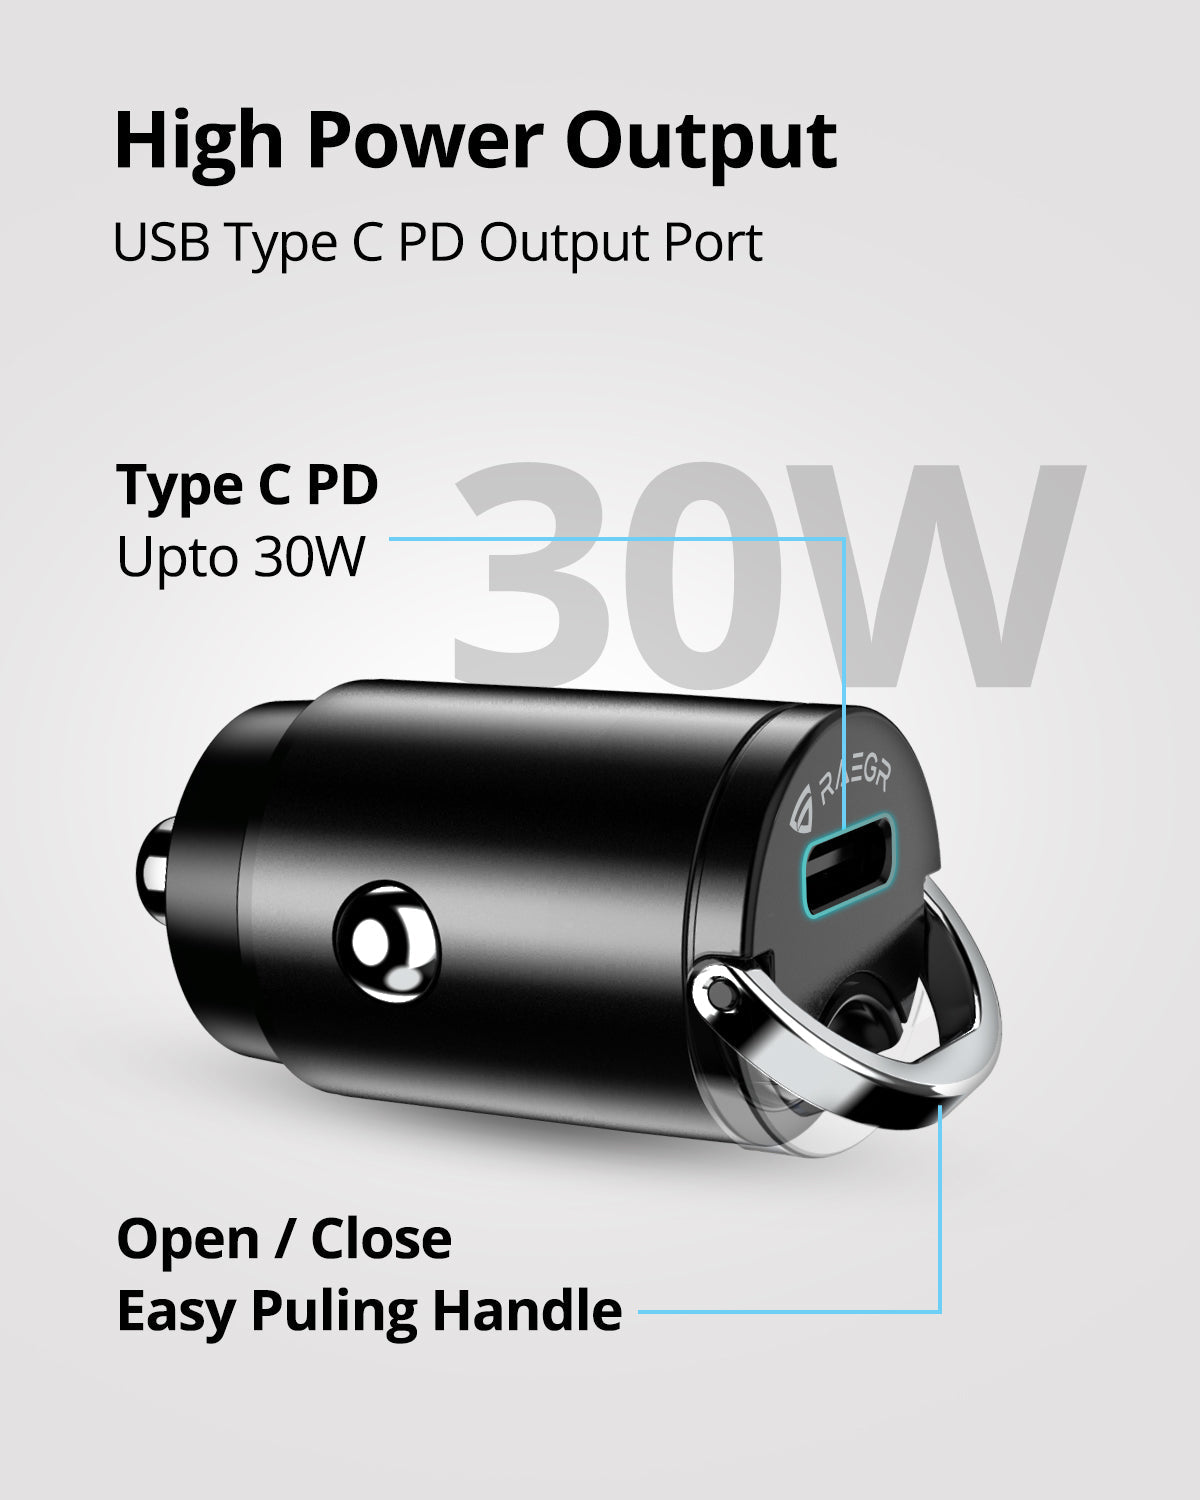 Chargeur rapide Usb Type C + 2 Usb Type A 30W PD Rixus RX102